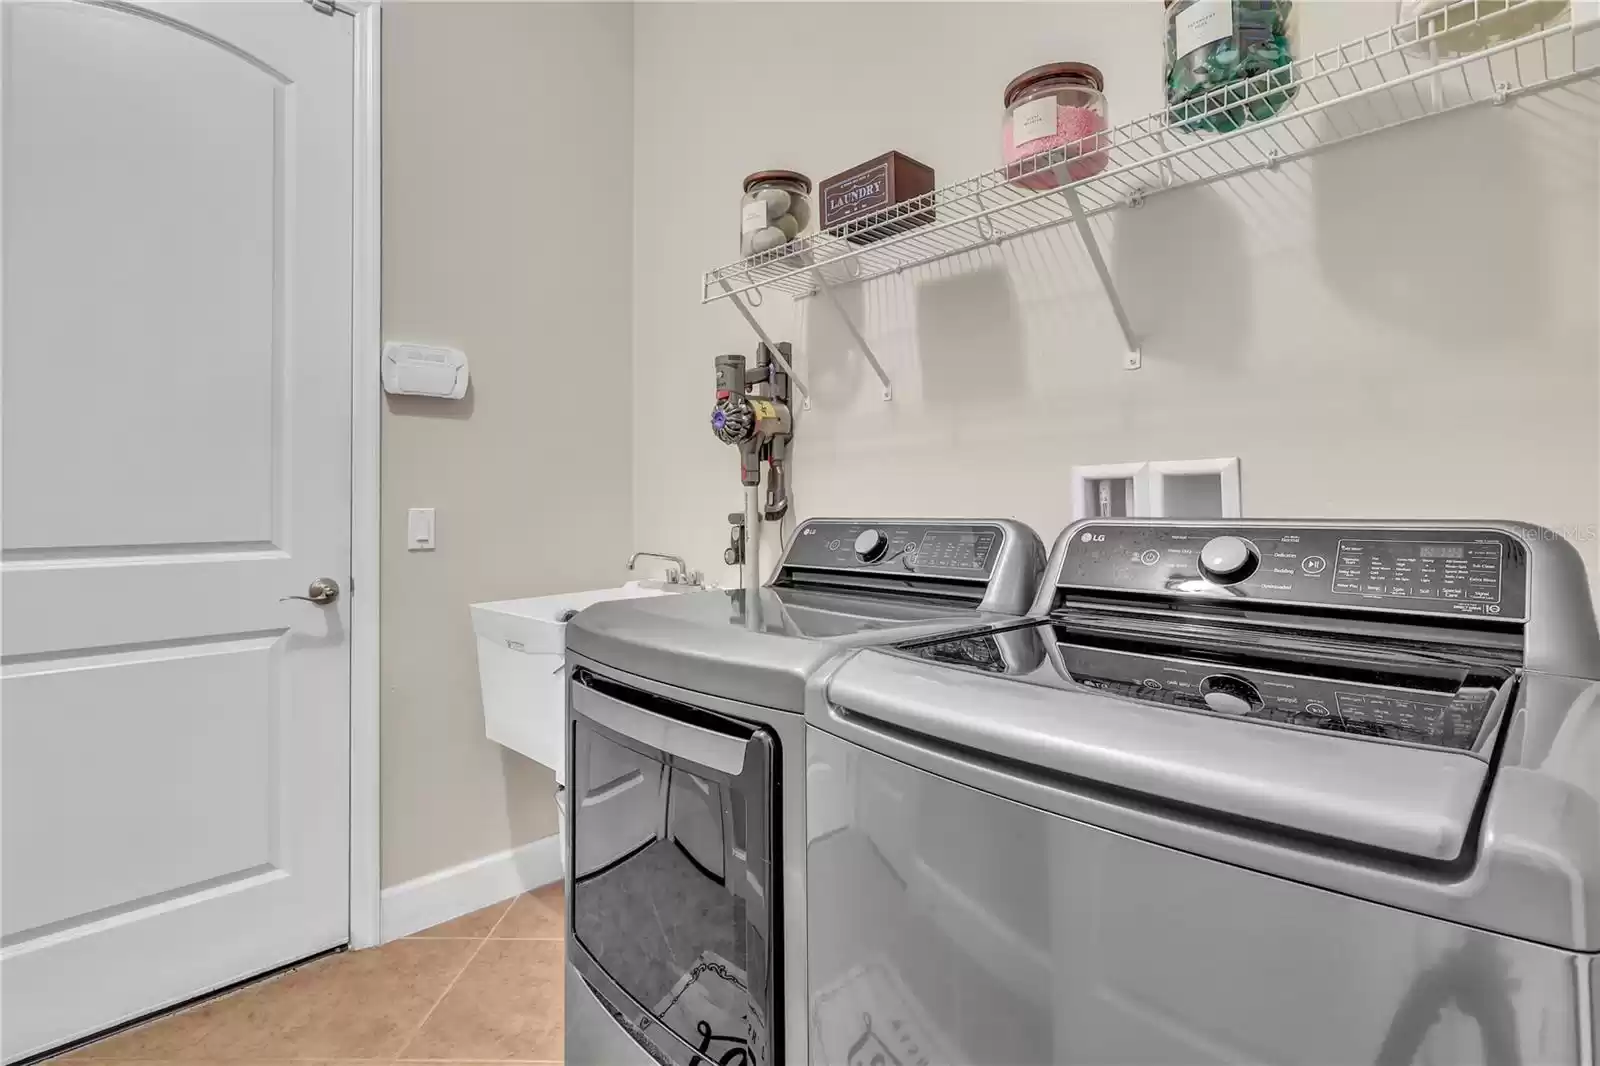 Laundry room with 2 storage closets